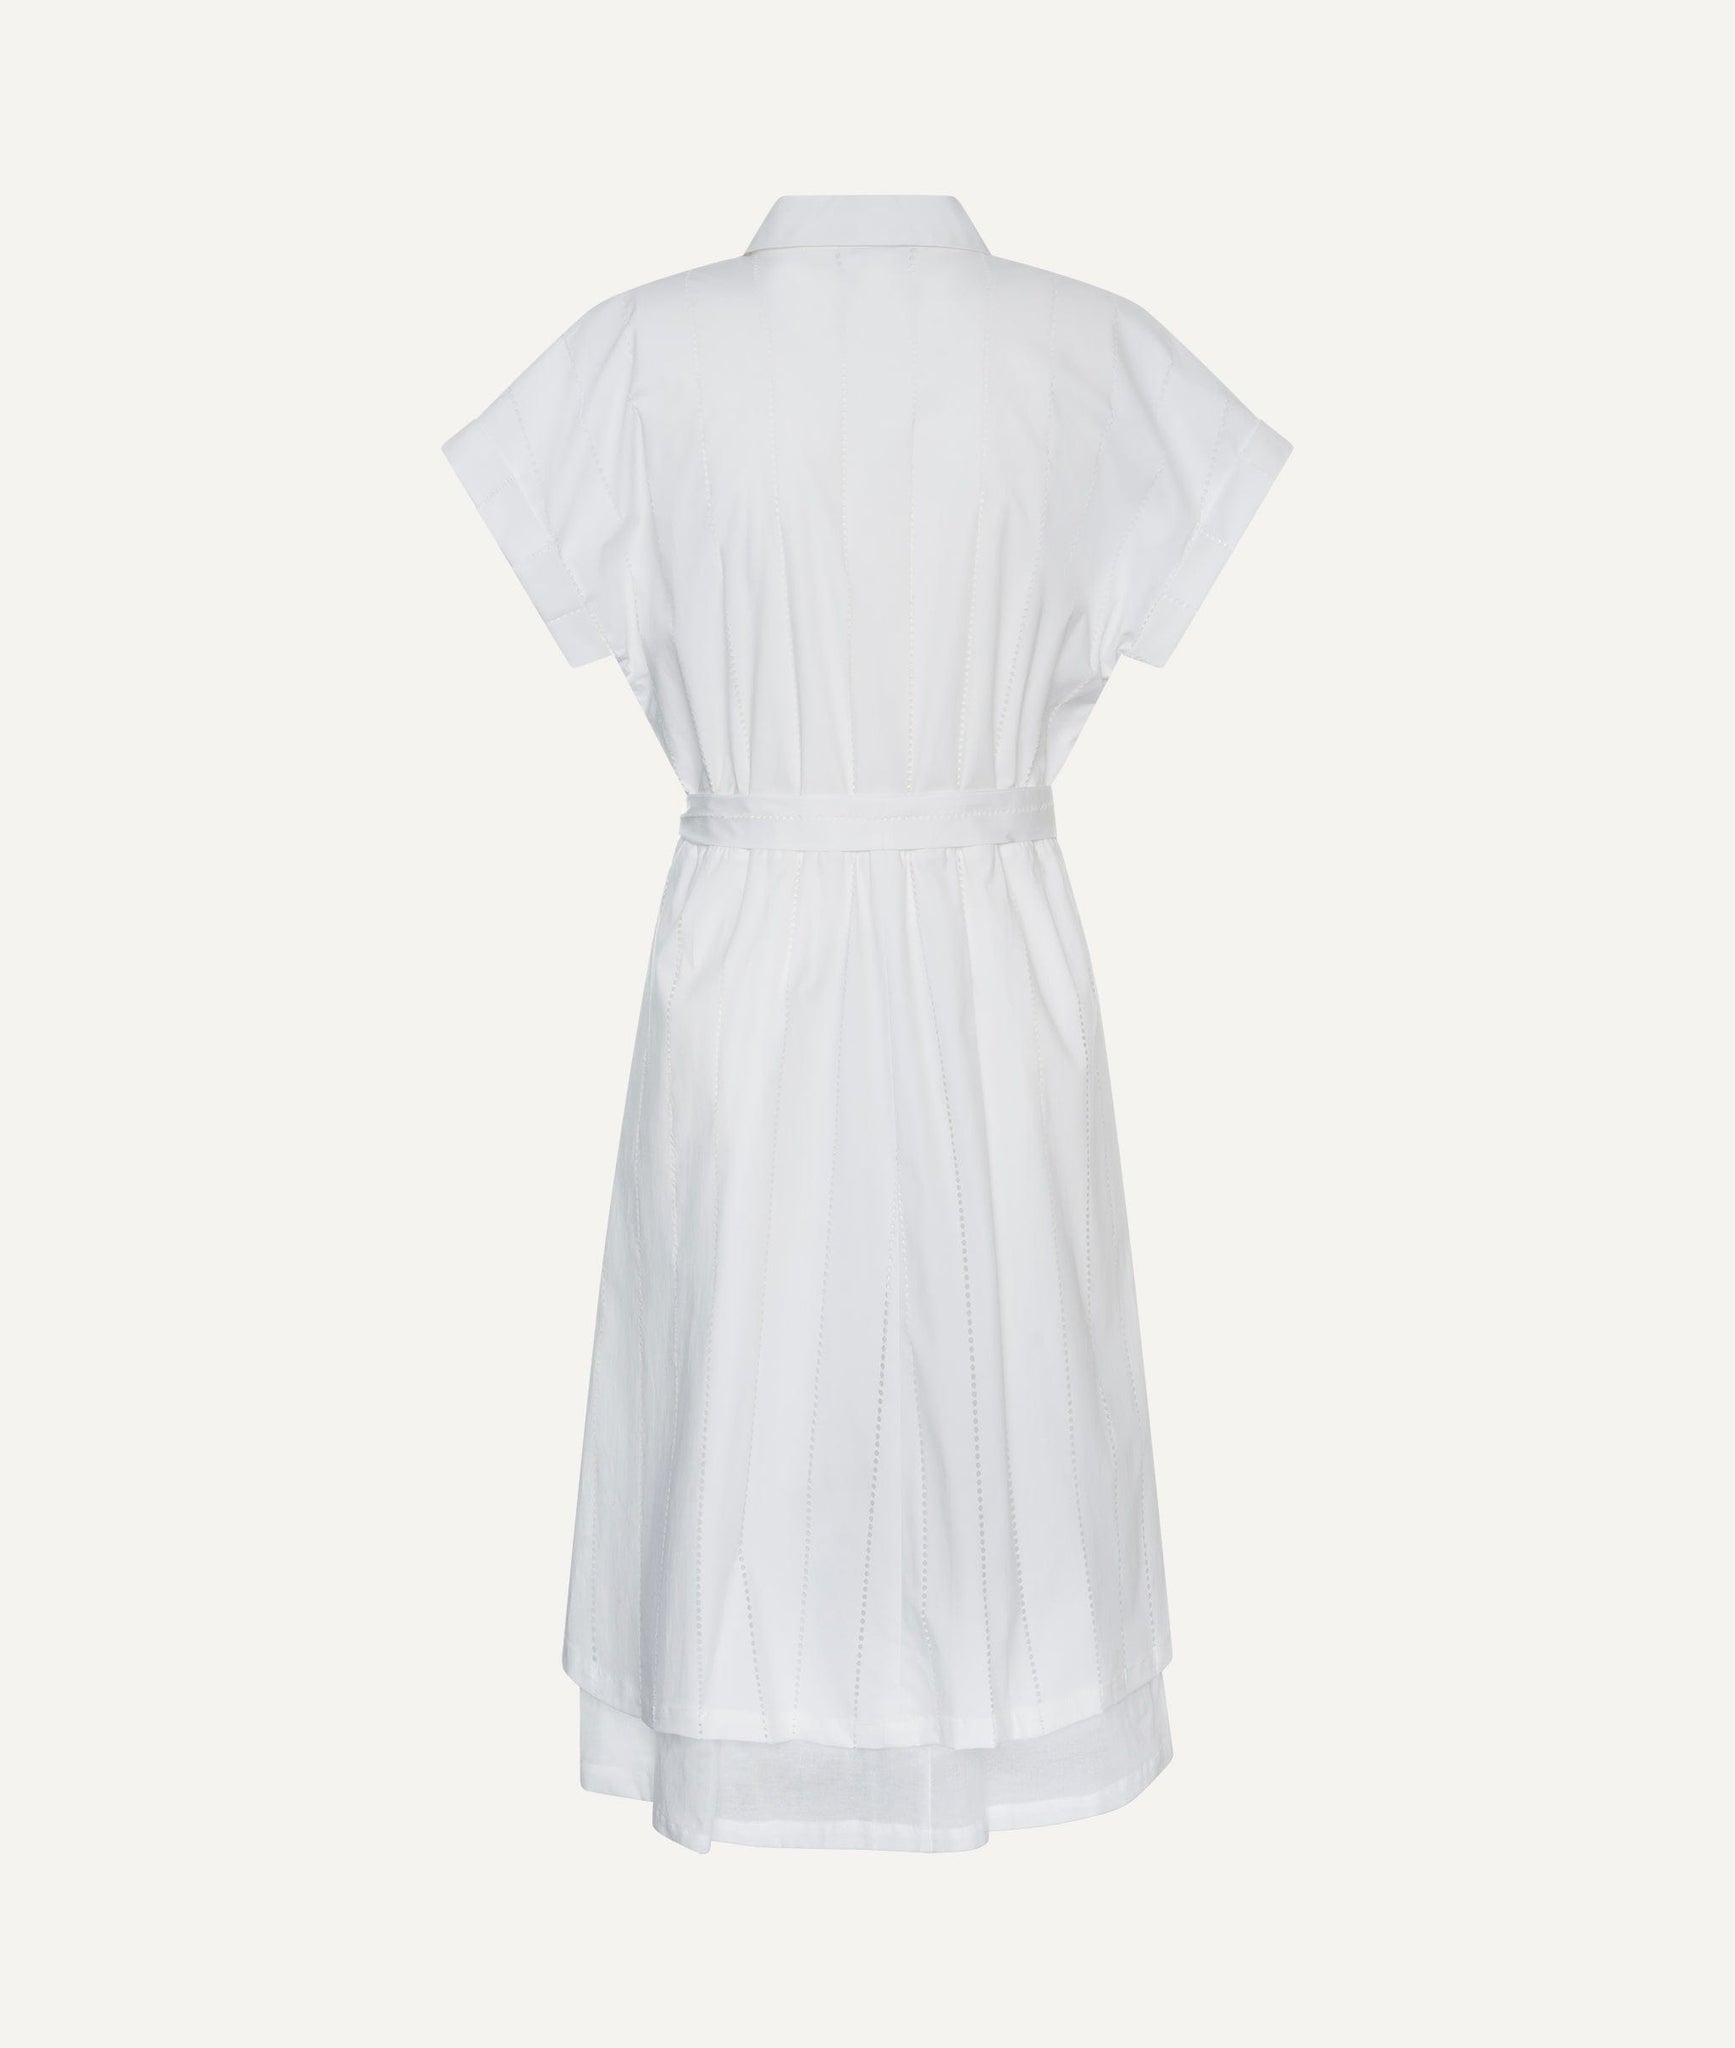 Peserico - Dress in Cotton